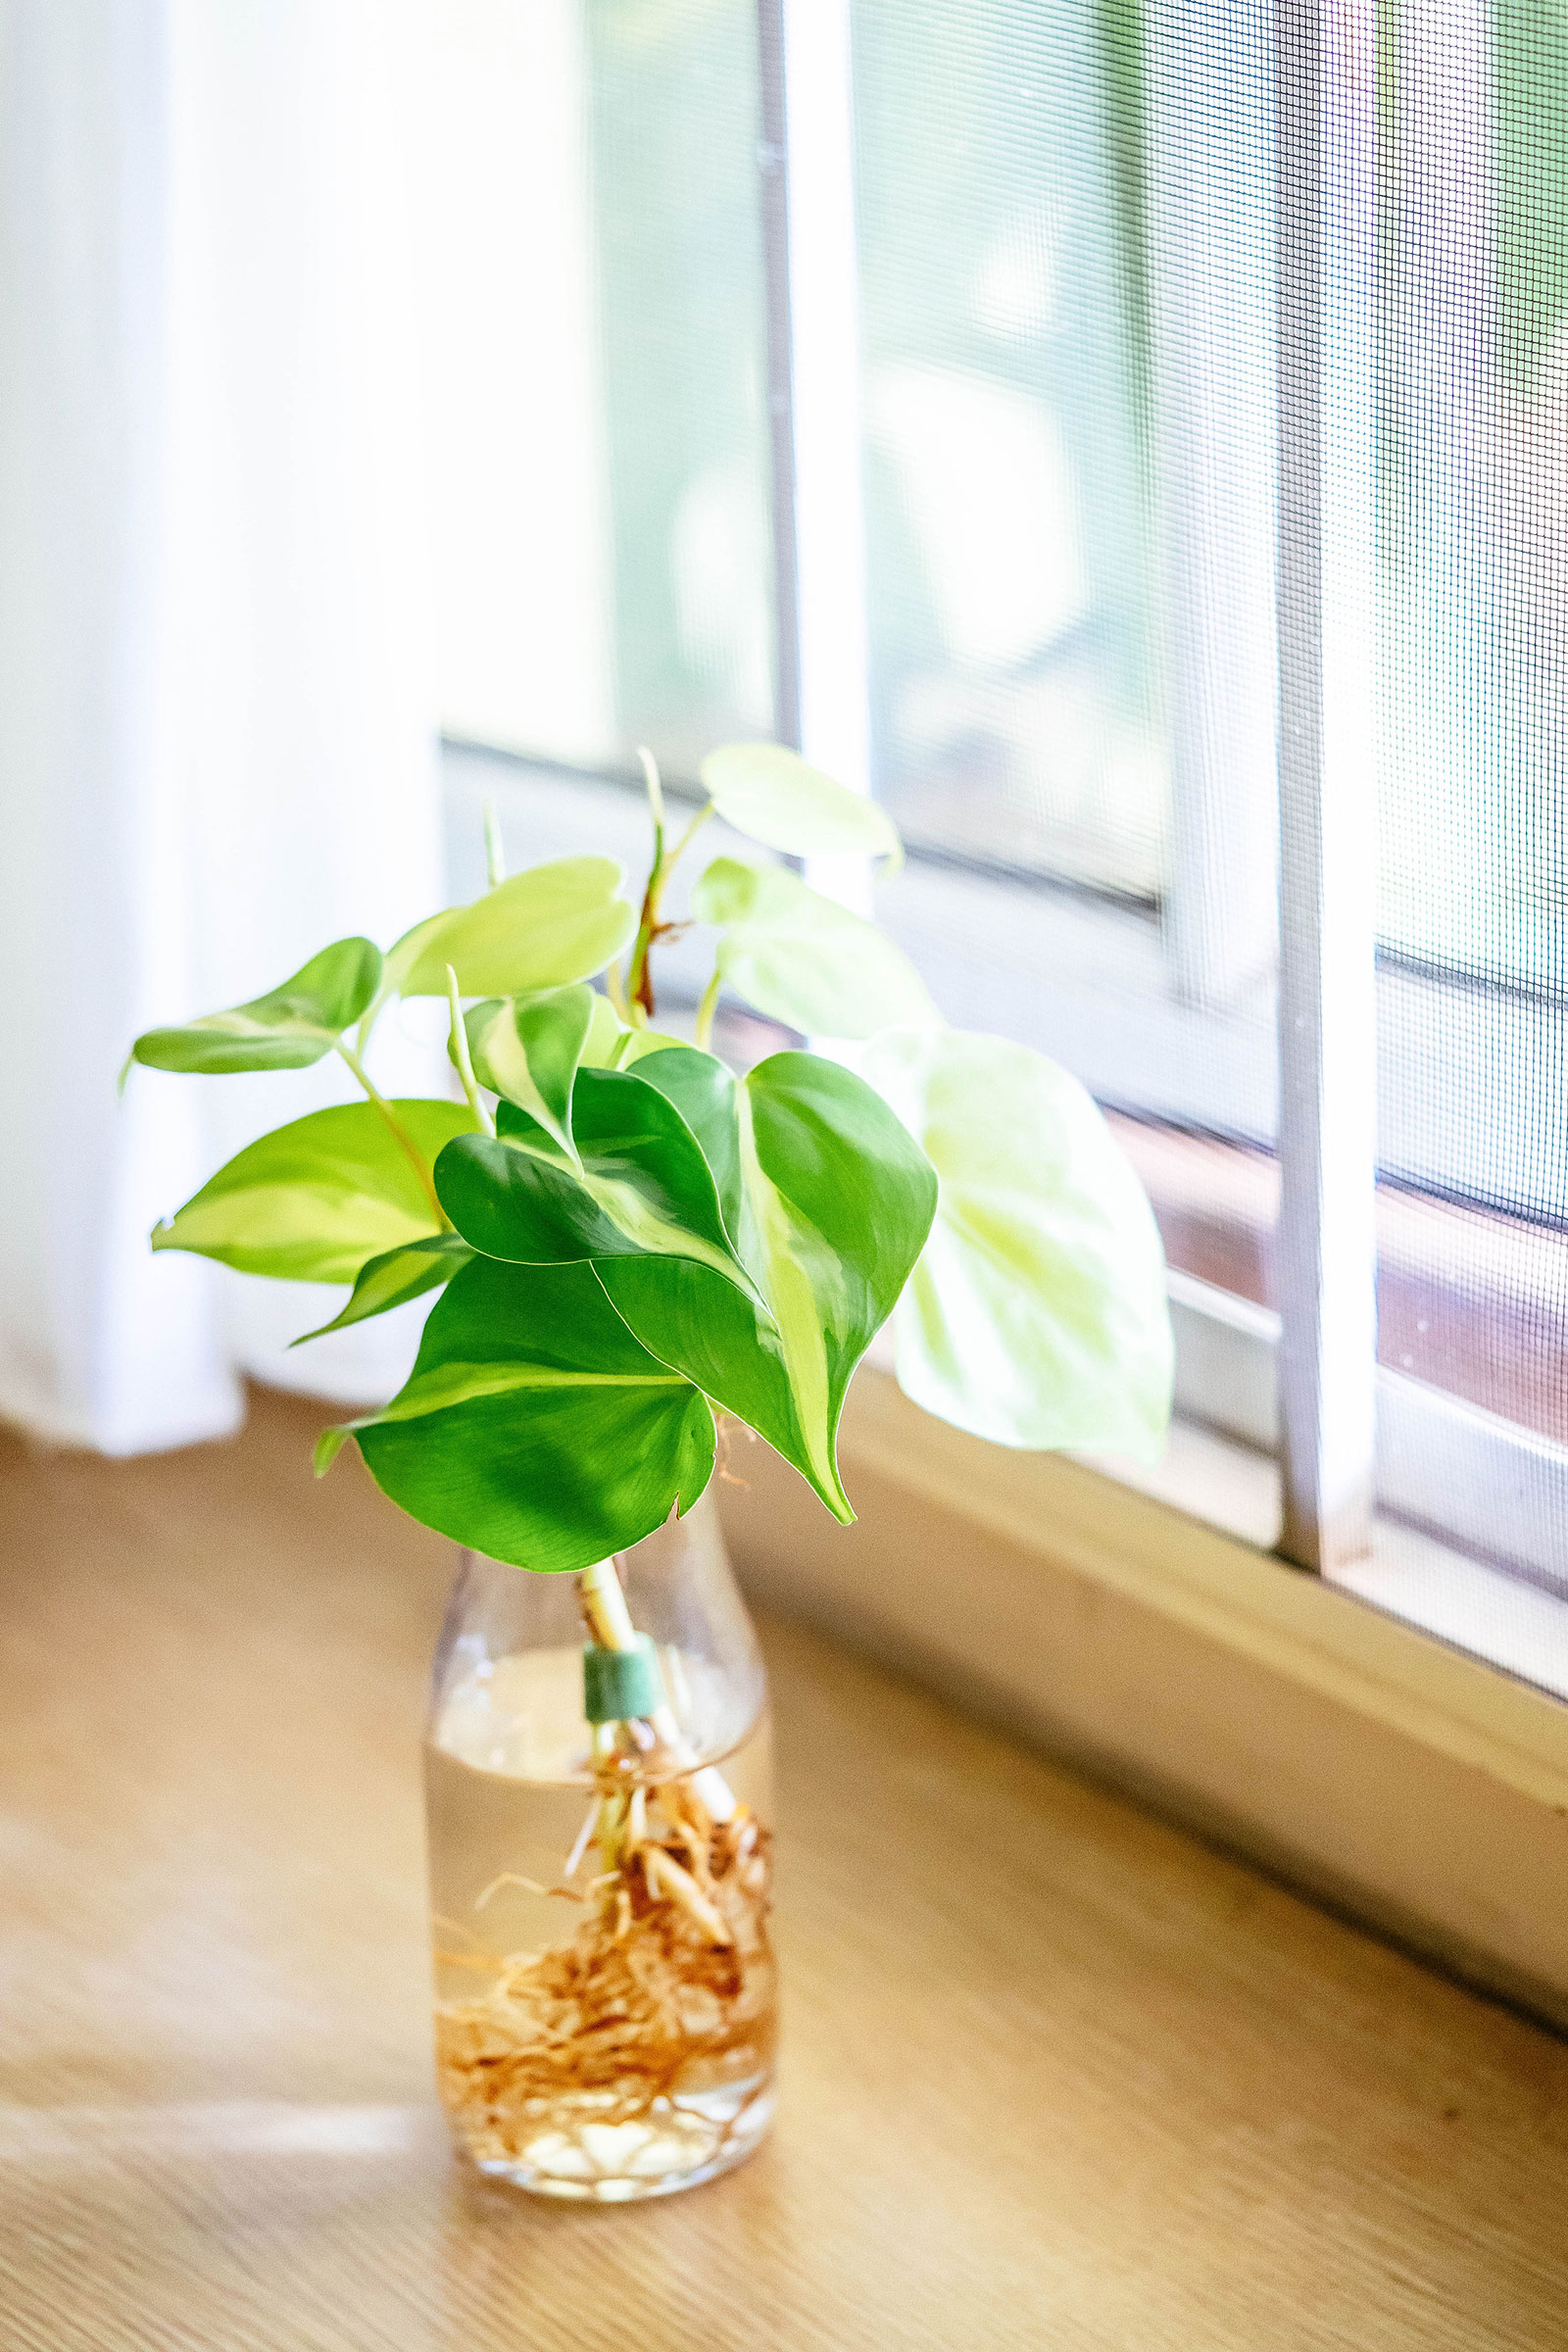 Heartleaf philodendron growing in water